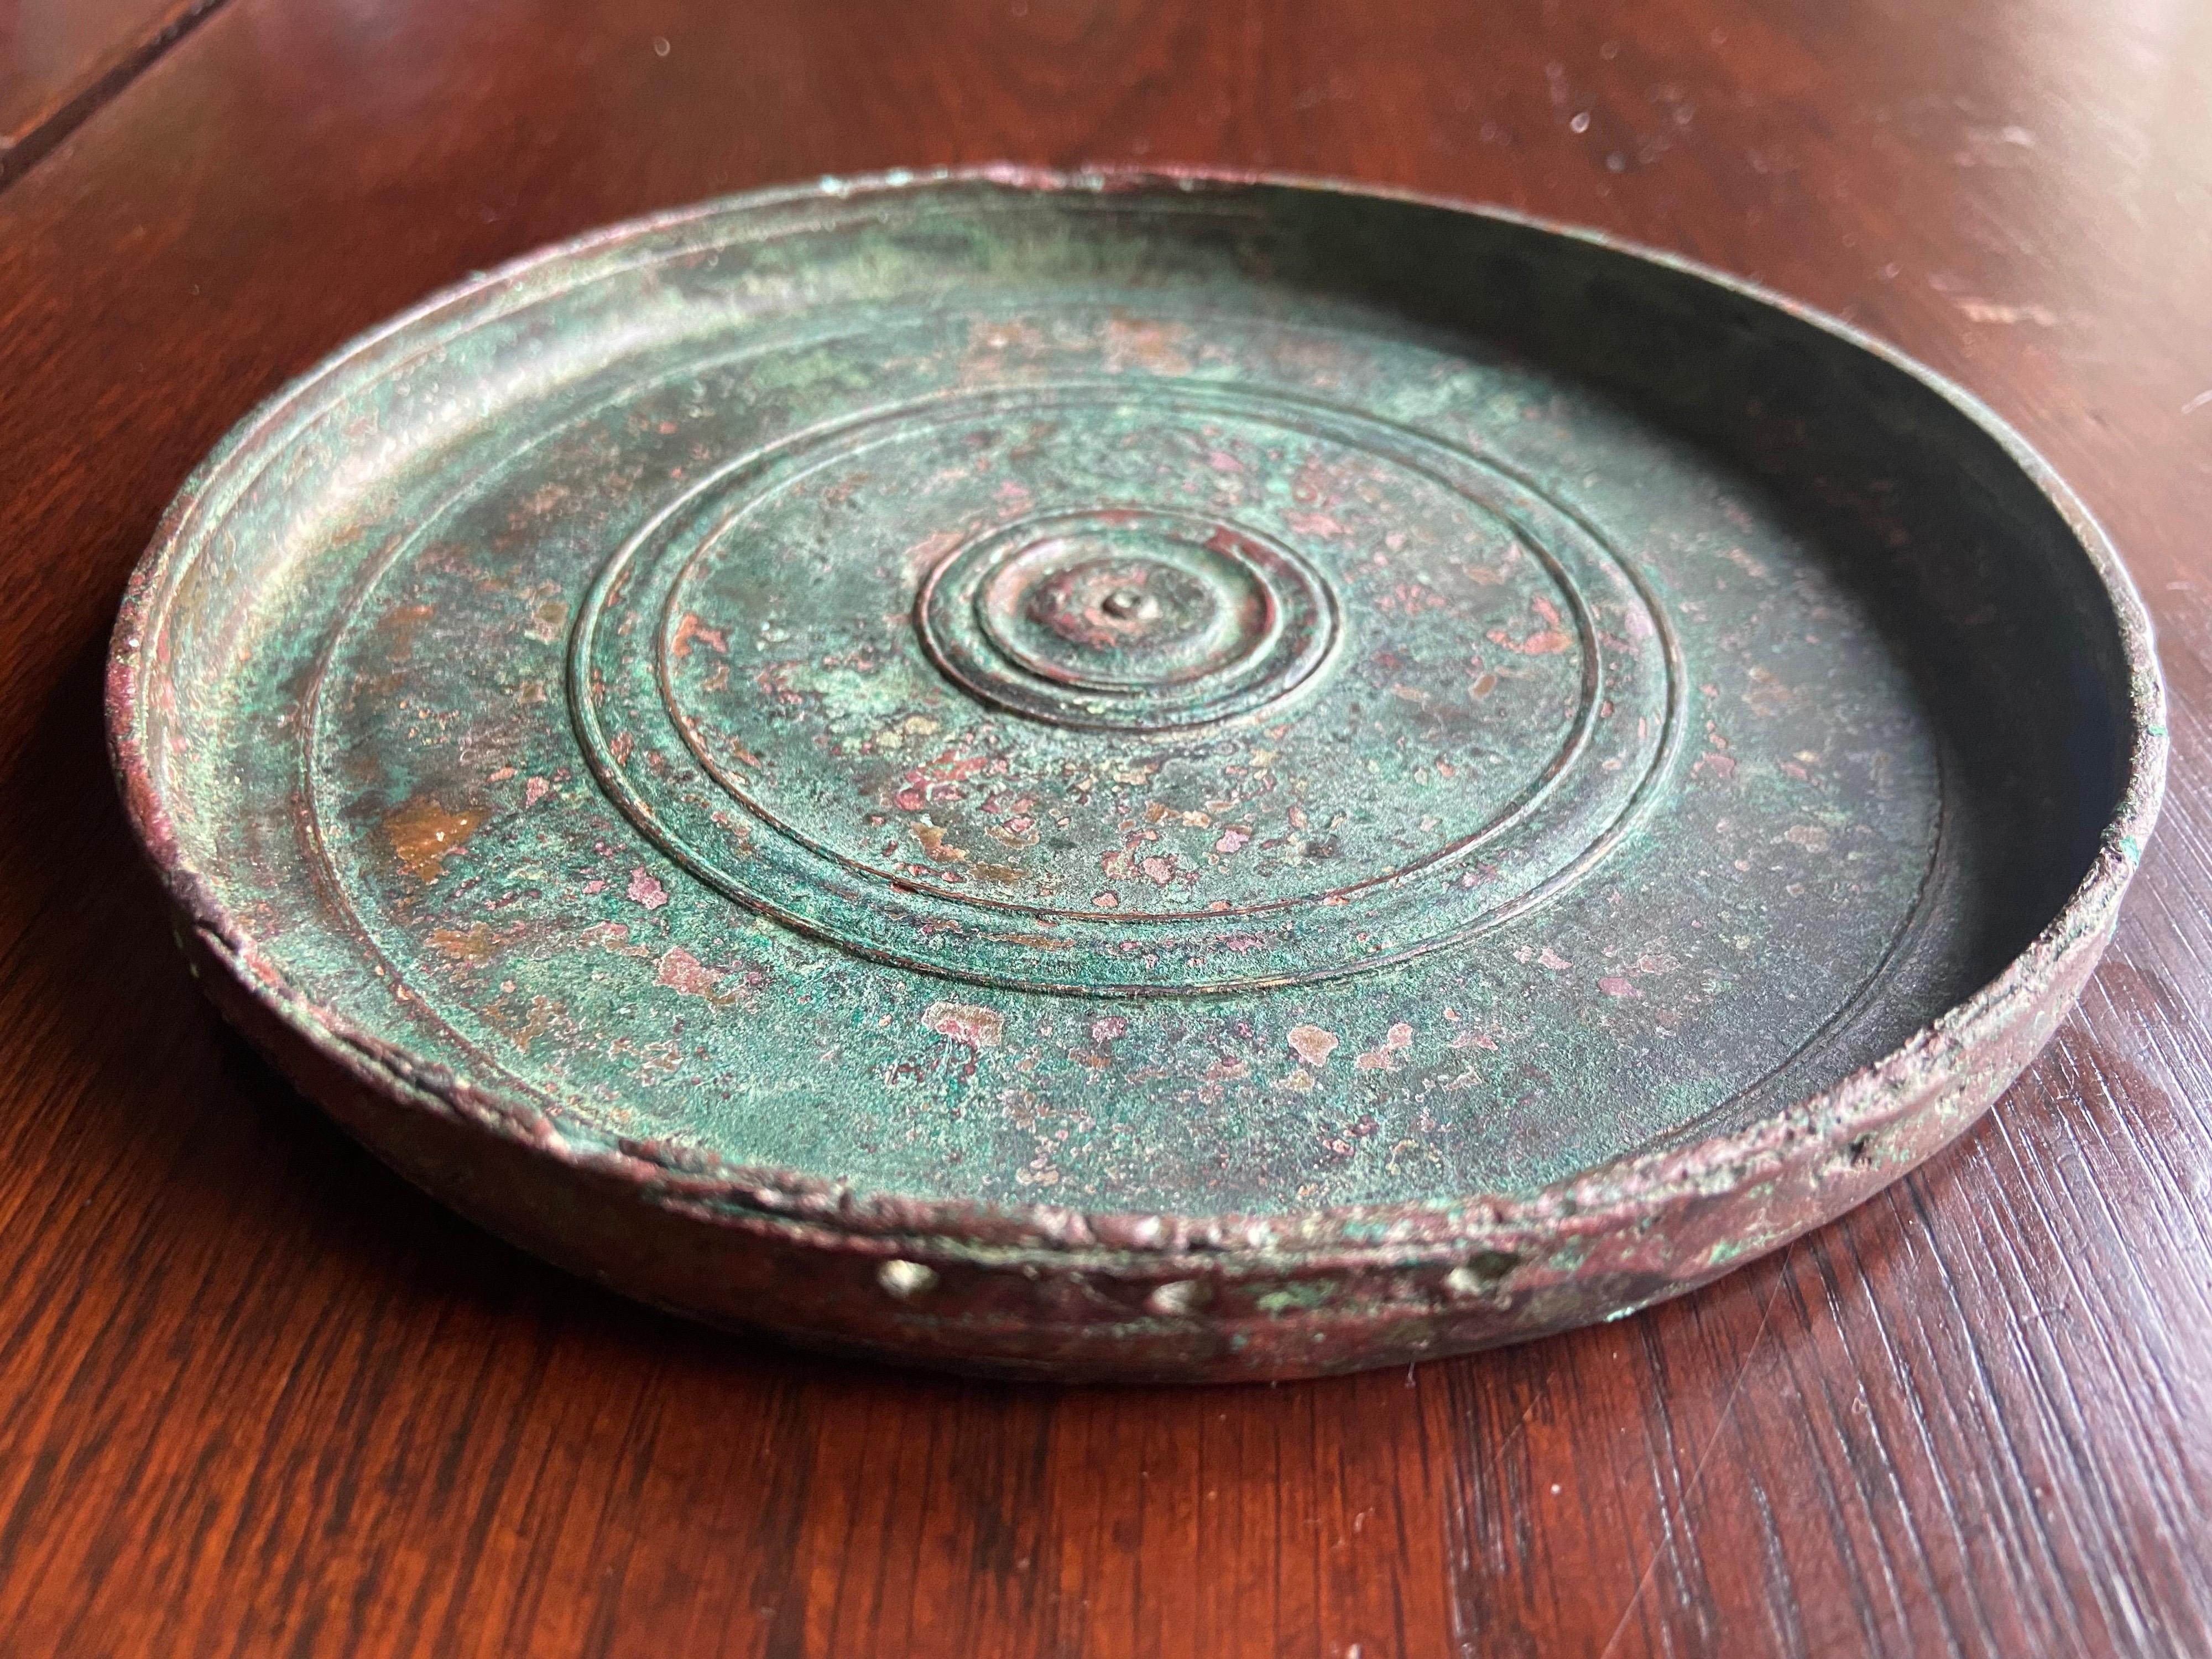 Highly decorated ancient Roman round bronze hand mirror in very good condition with lovely patina without a cover.
Possibly there was a held attached to it but now only the three small halls are visible. Measure: 16 cm.

Highly decorated ancient